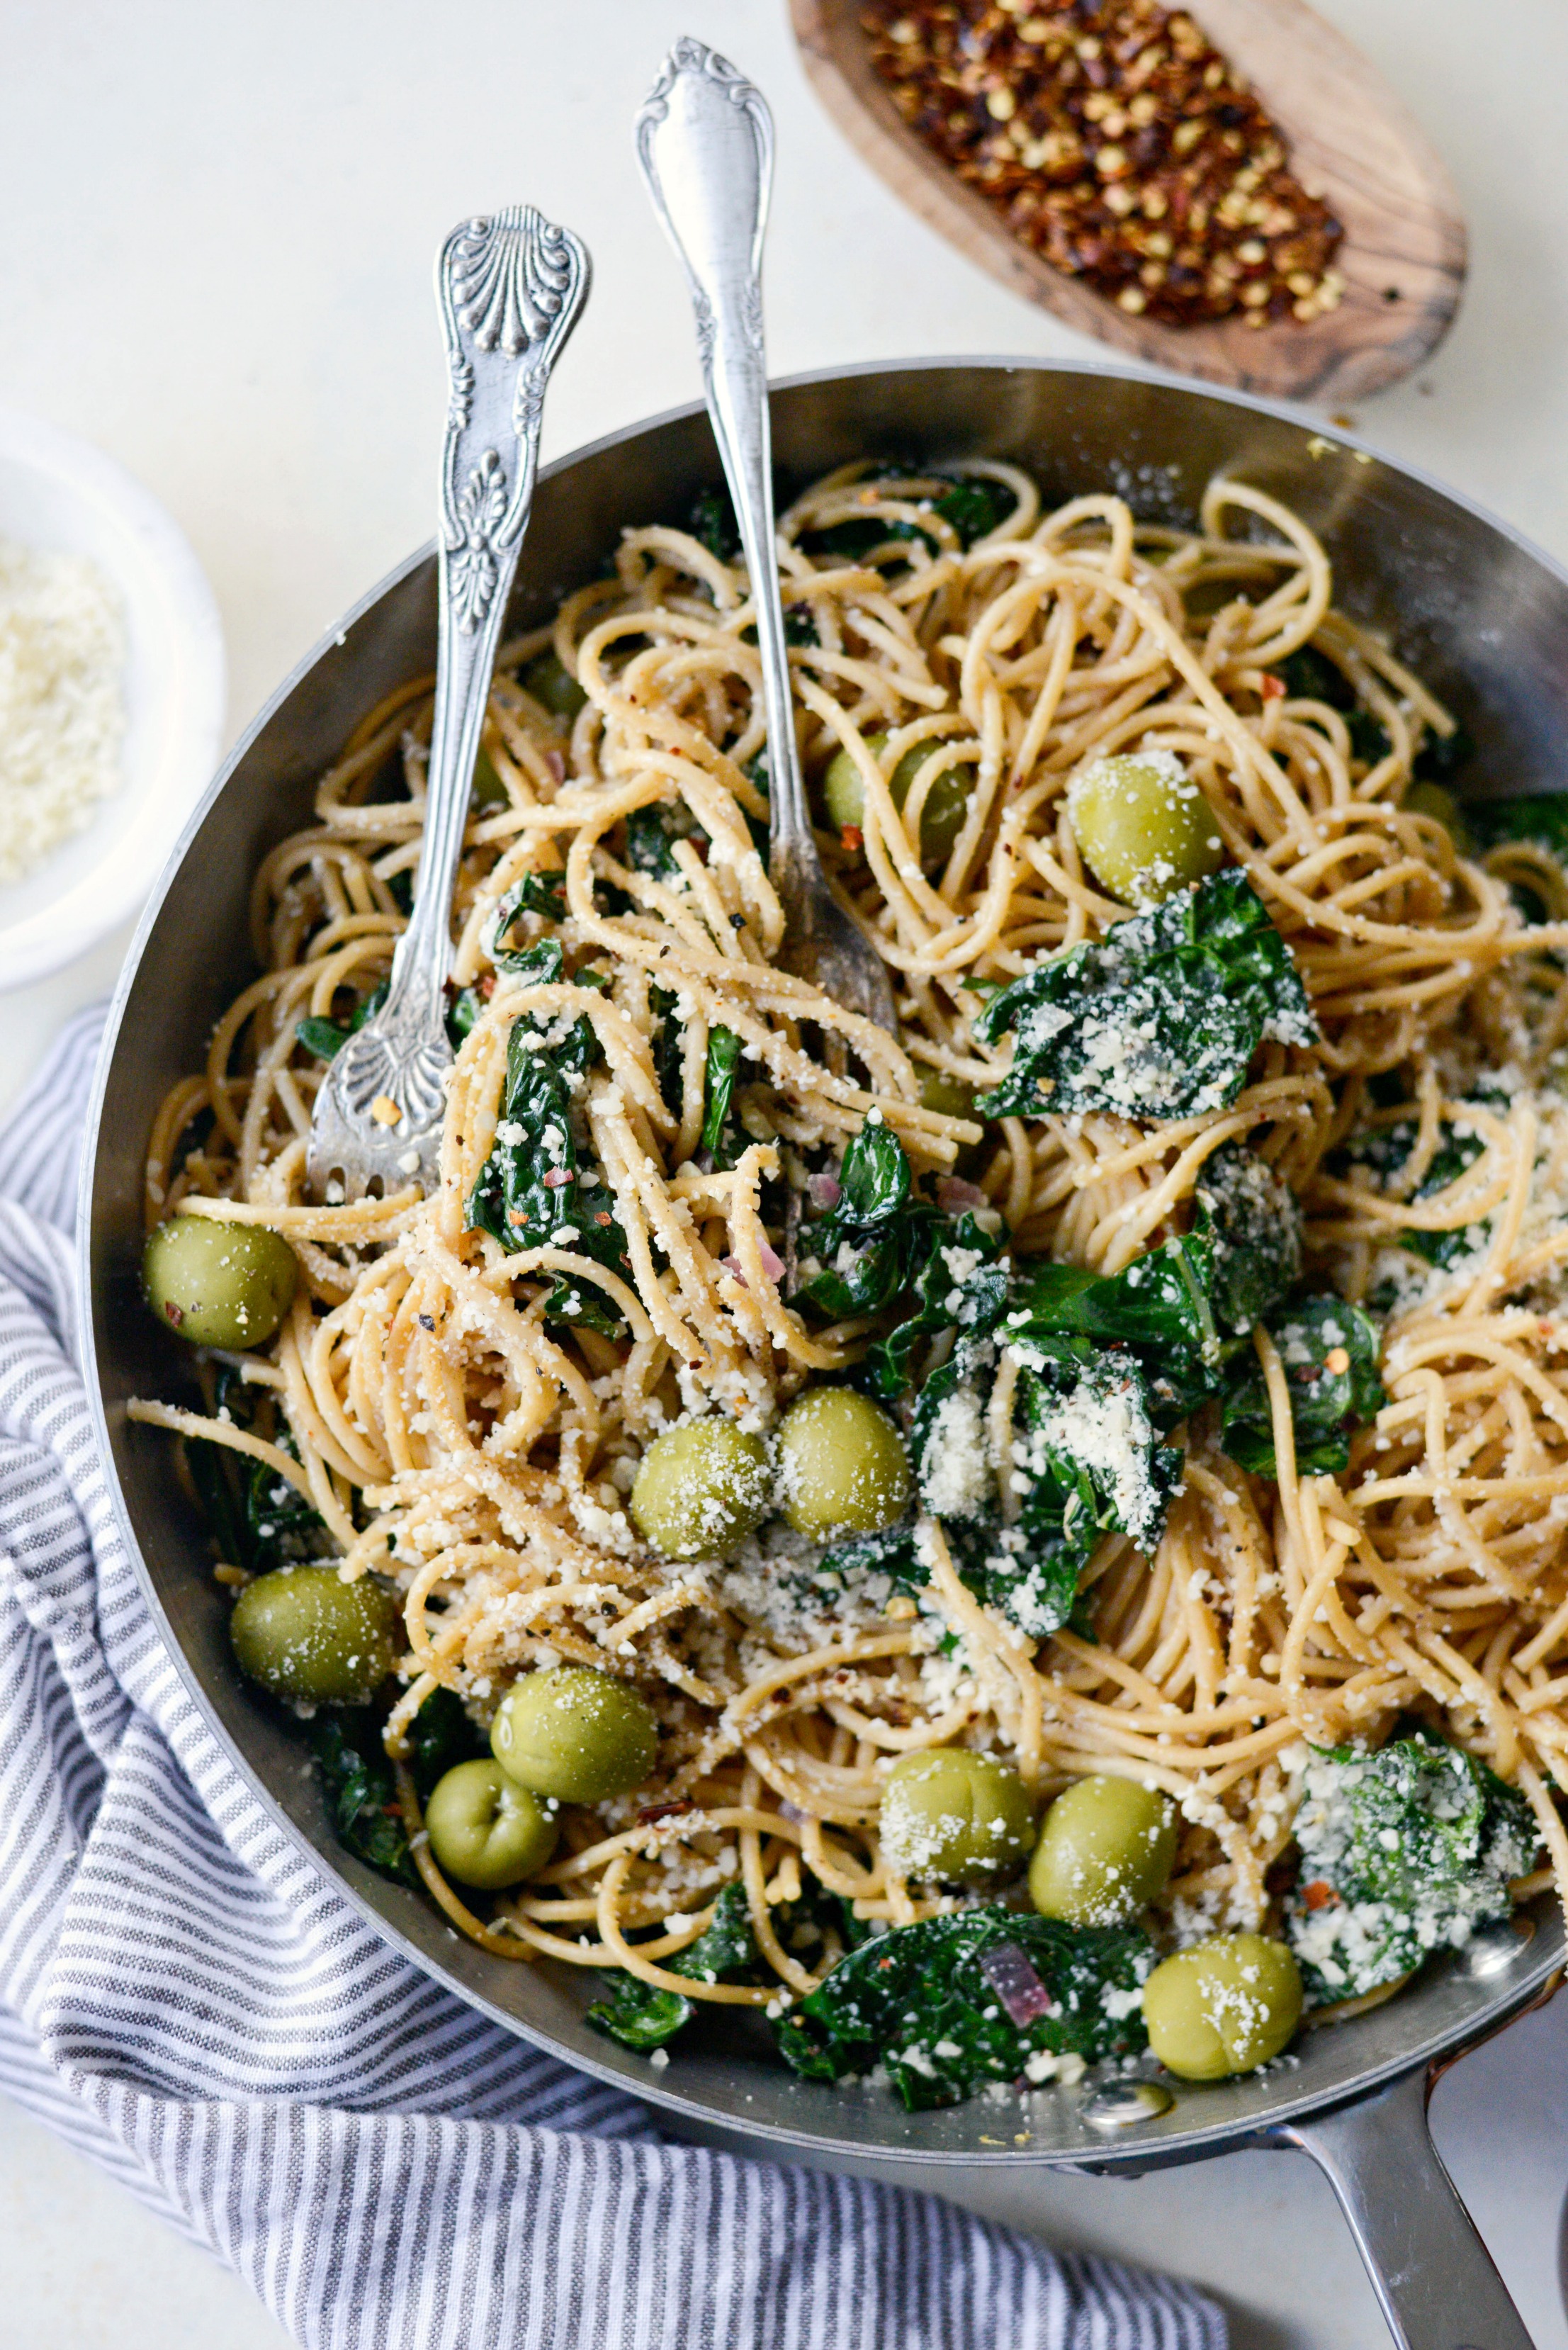 Lemon Parmesan and Kale Spaghetti with Olives - Simply Scratch